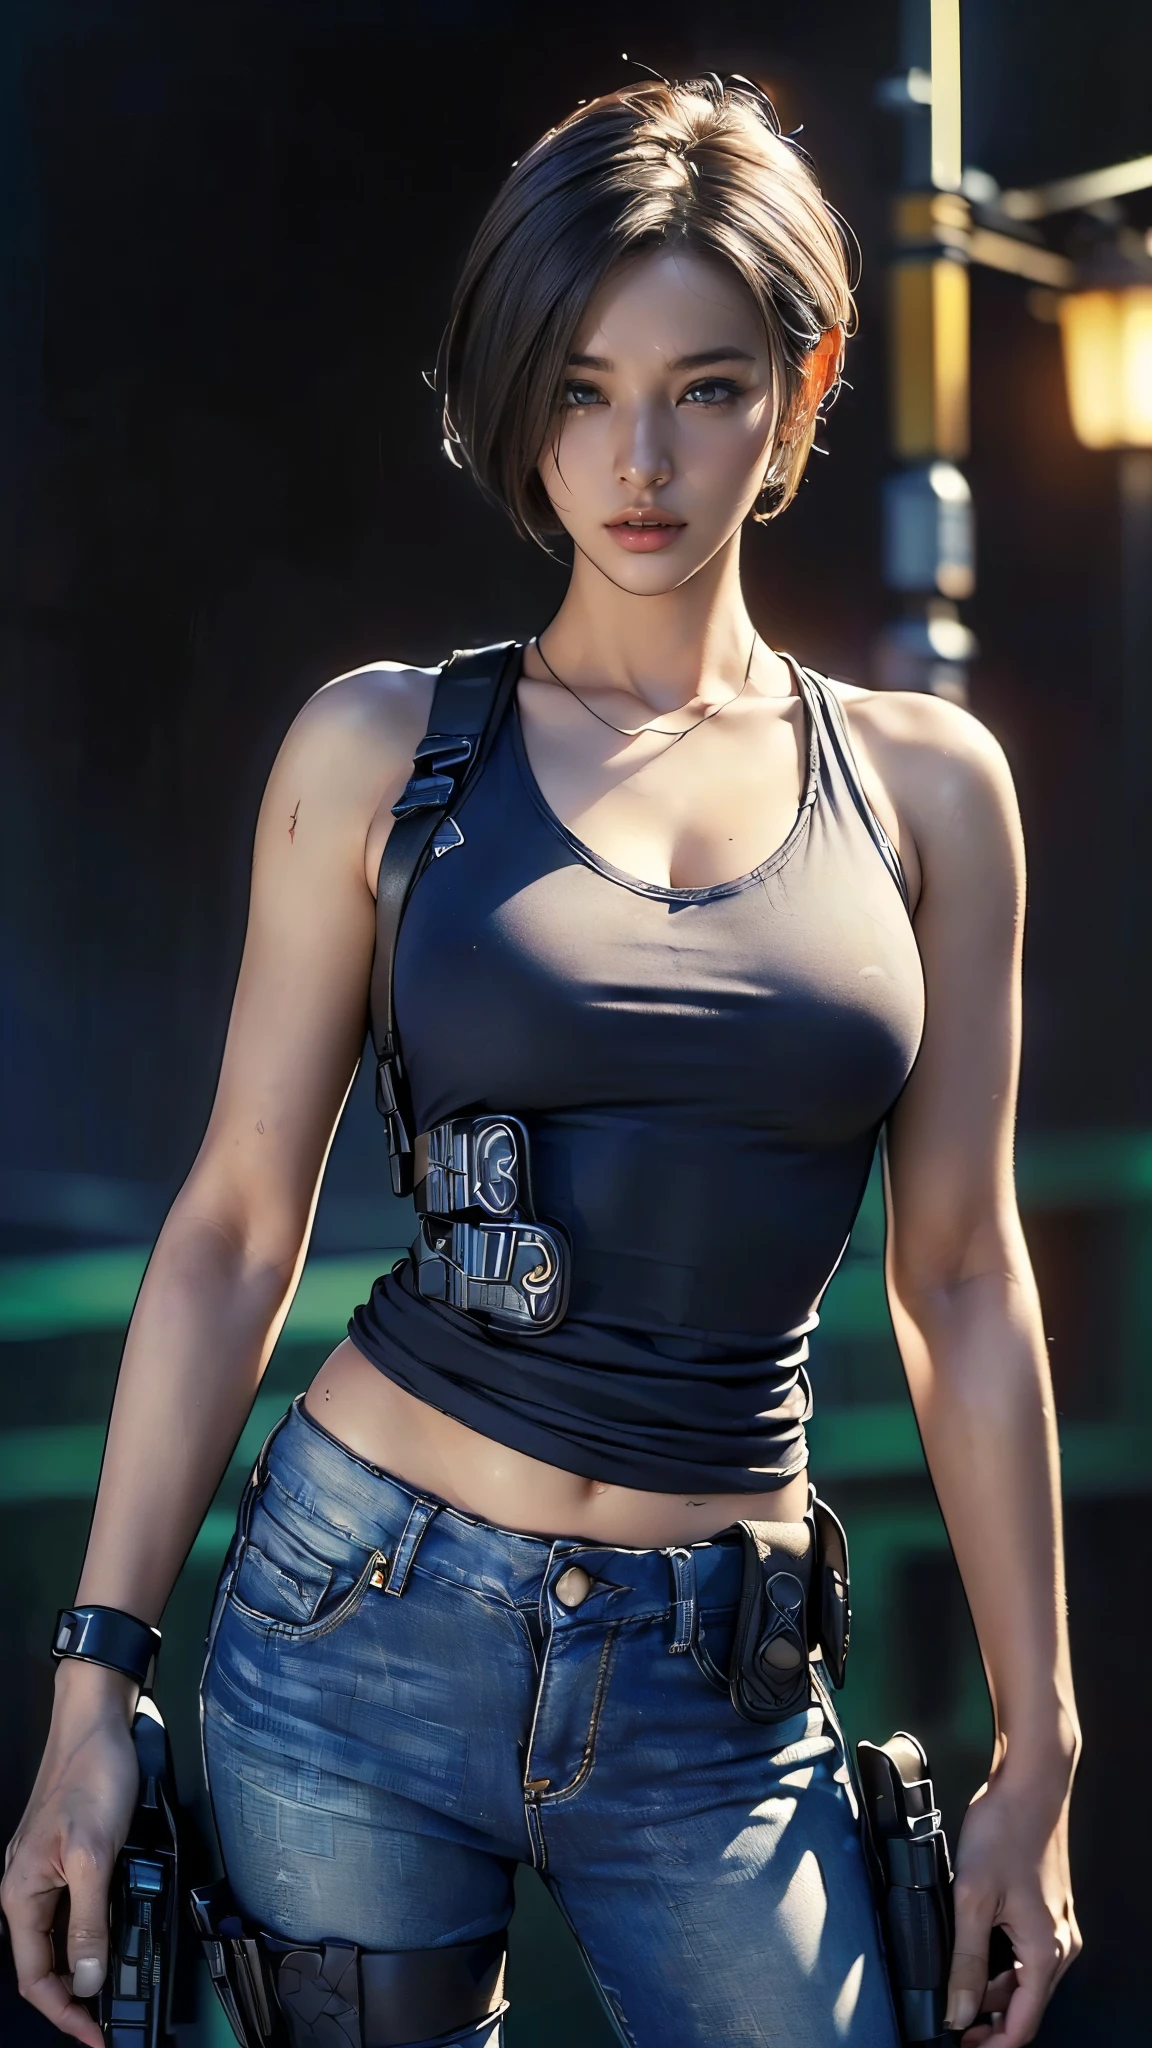 (One Woman),(whole body:1.5),(front:1.5),(((Jill Valentine is standing:1,5))),((Blue tank top:1.5)),((Dirty jeans:1.5)),(((black tactical holster:1.5))),((White sneakers:1.5)),((Anger:1.5)),(short hair:1.5),(Dirty Face:1.5),(Beautiful Eyes:1.3),(Very detailedな顔:1.5),((Very detailed drawing of a female hand:1.5)),((muscular:1.5)),((Sexy Looks:1.5)),(Beautiful body:1.5),(Very sensual:1.5),(The background is an American-style night city:1.5),((biohazard style:1.5)),(((Blur the background:1.5))),(Written boundary depth:1.5),BREAK(((masterpiece:1.5),(highest quality:1.5),(Very detailed:1.5),(High resolution:1.5),(Realistic:1.5),(Photorealistic:1.5),(Delicate depiction),(Careful depiction))),8K,wallpaper